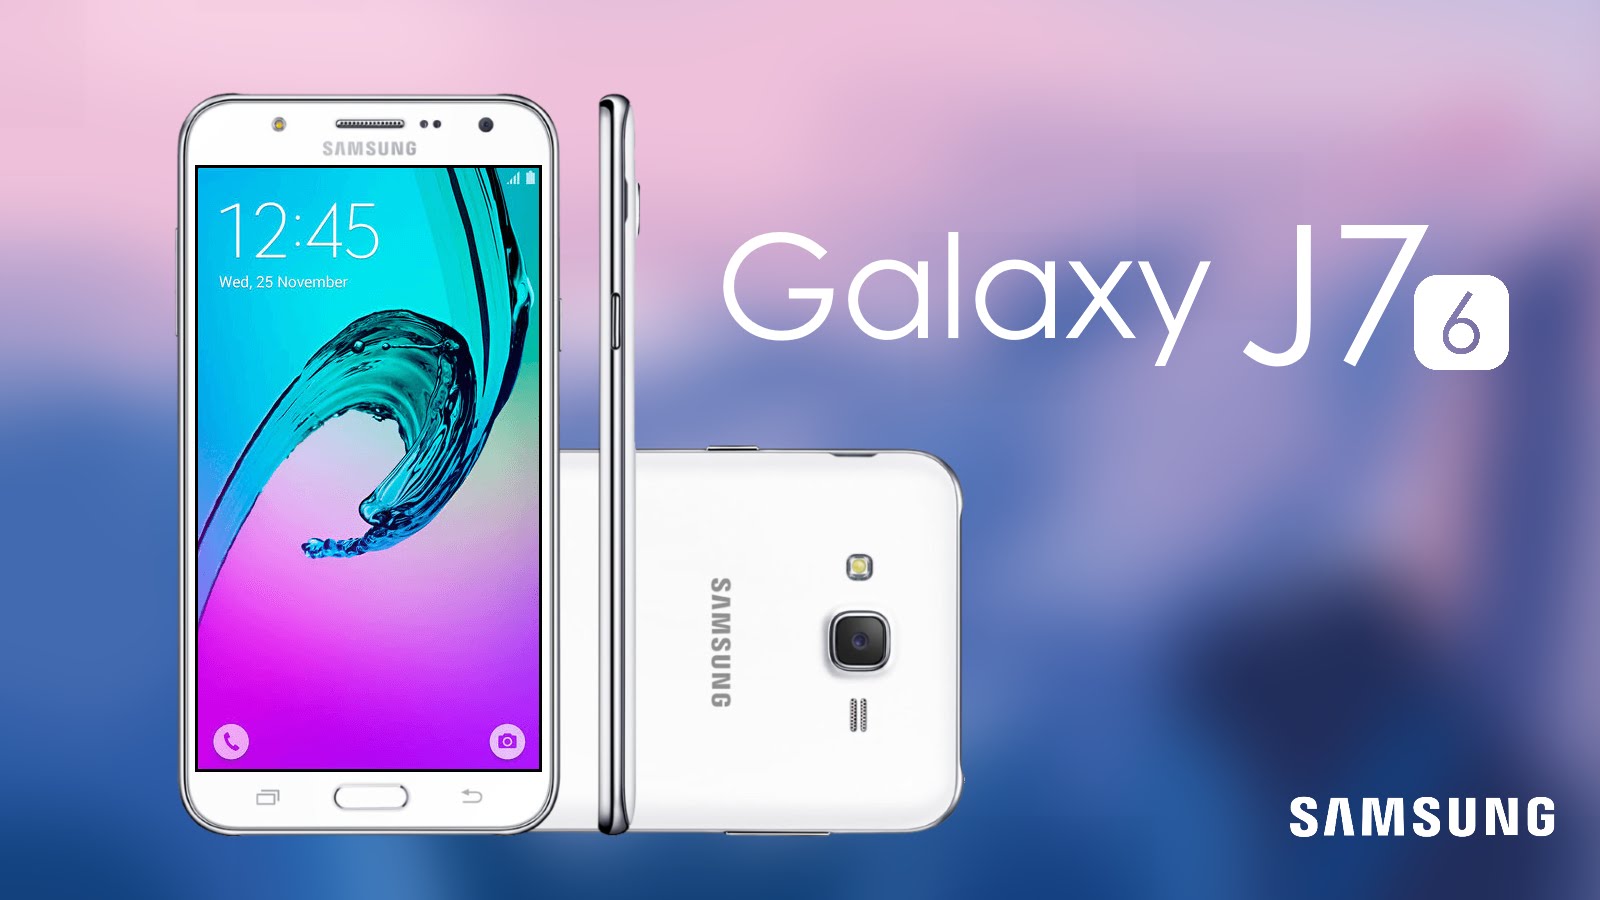 Samsung Launches Galaxy J7 2016 in Pakistan